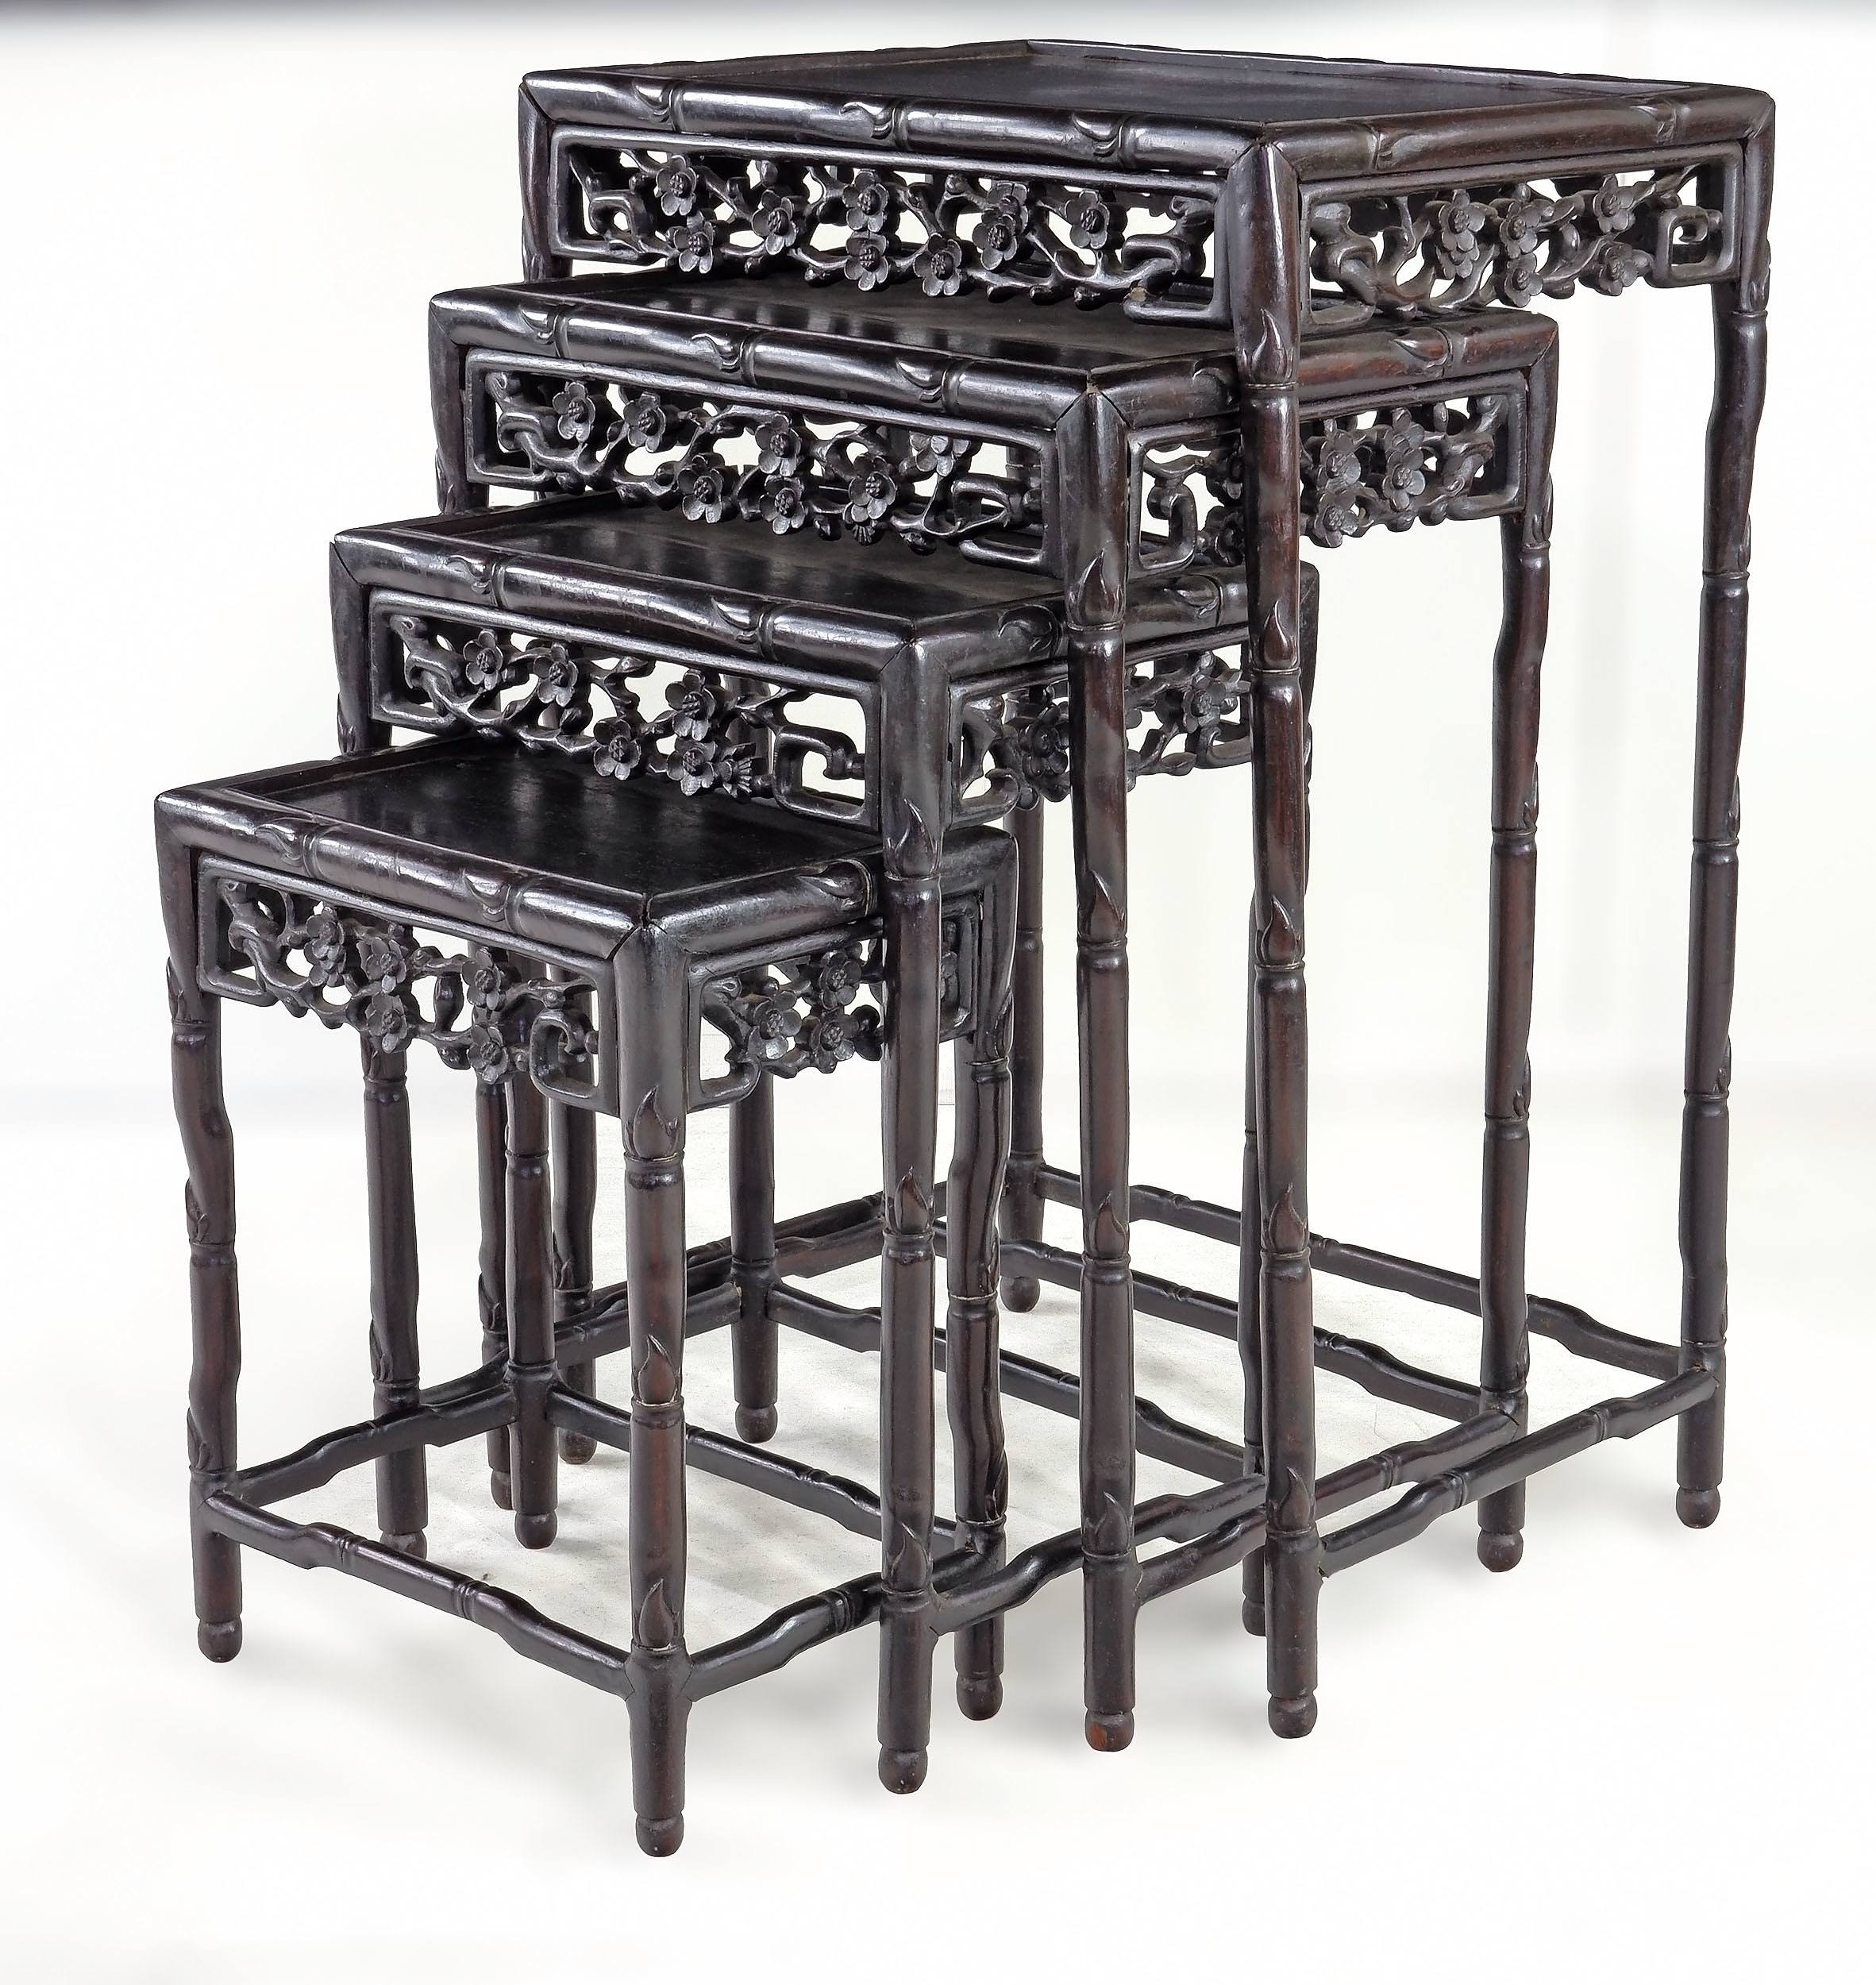 'Set of Four Chinese Carved Rosewood Nesting Tables, Early to Mid 20th Century'